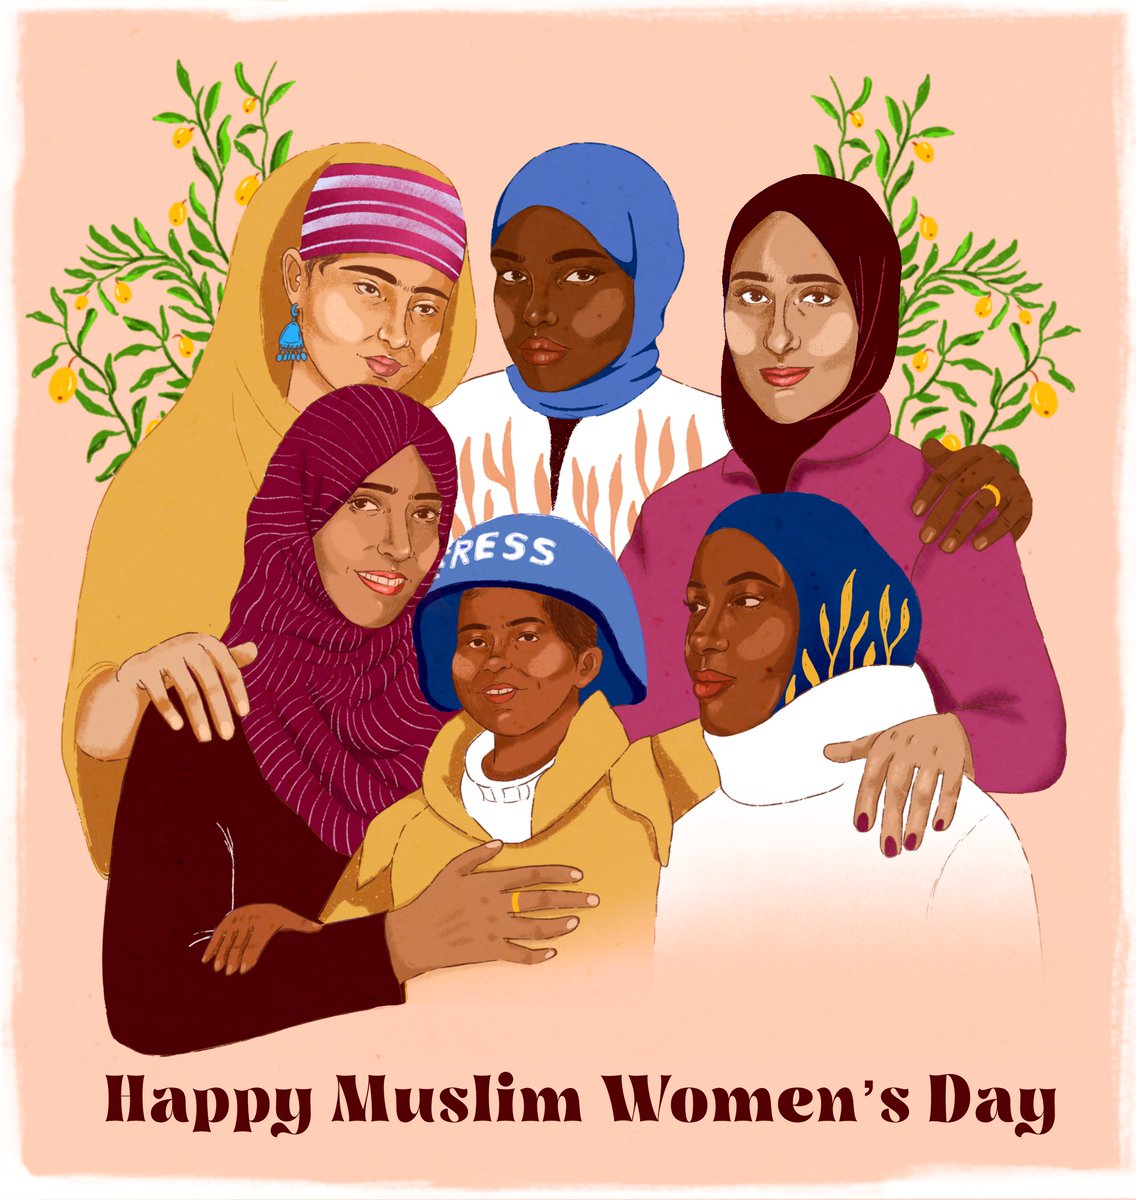 We’re celebrating #MuslimWomensDay! Today was created to reimagine opportunities for Muslim women to be seen and heard in all spaces. Join us in celebrating the Muslim women in our lives today and everyday. #GlobalGoals